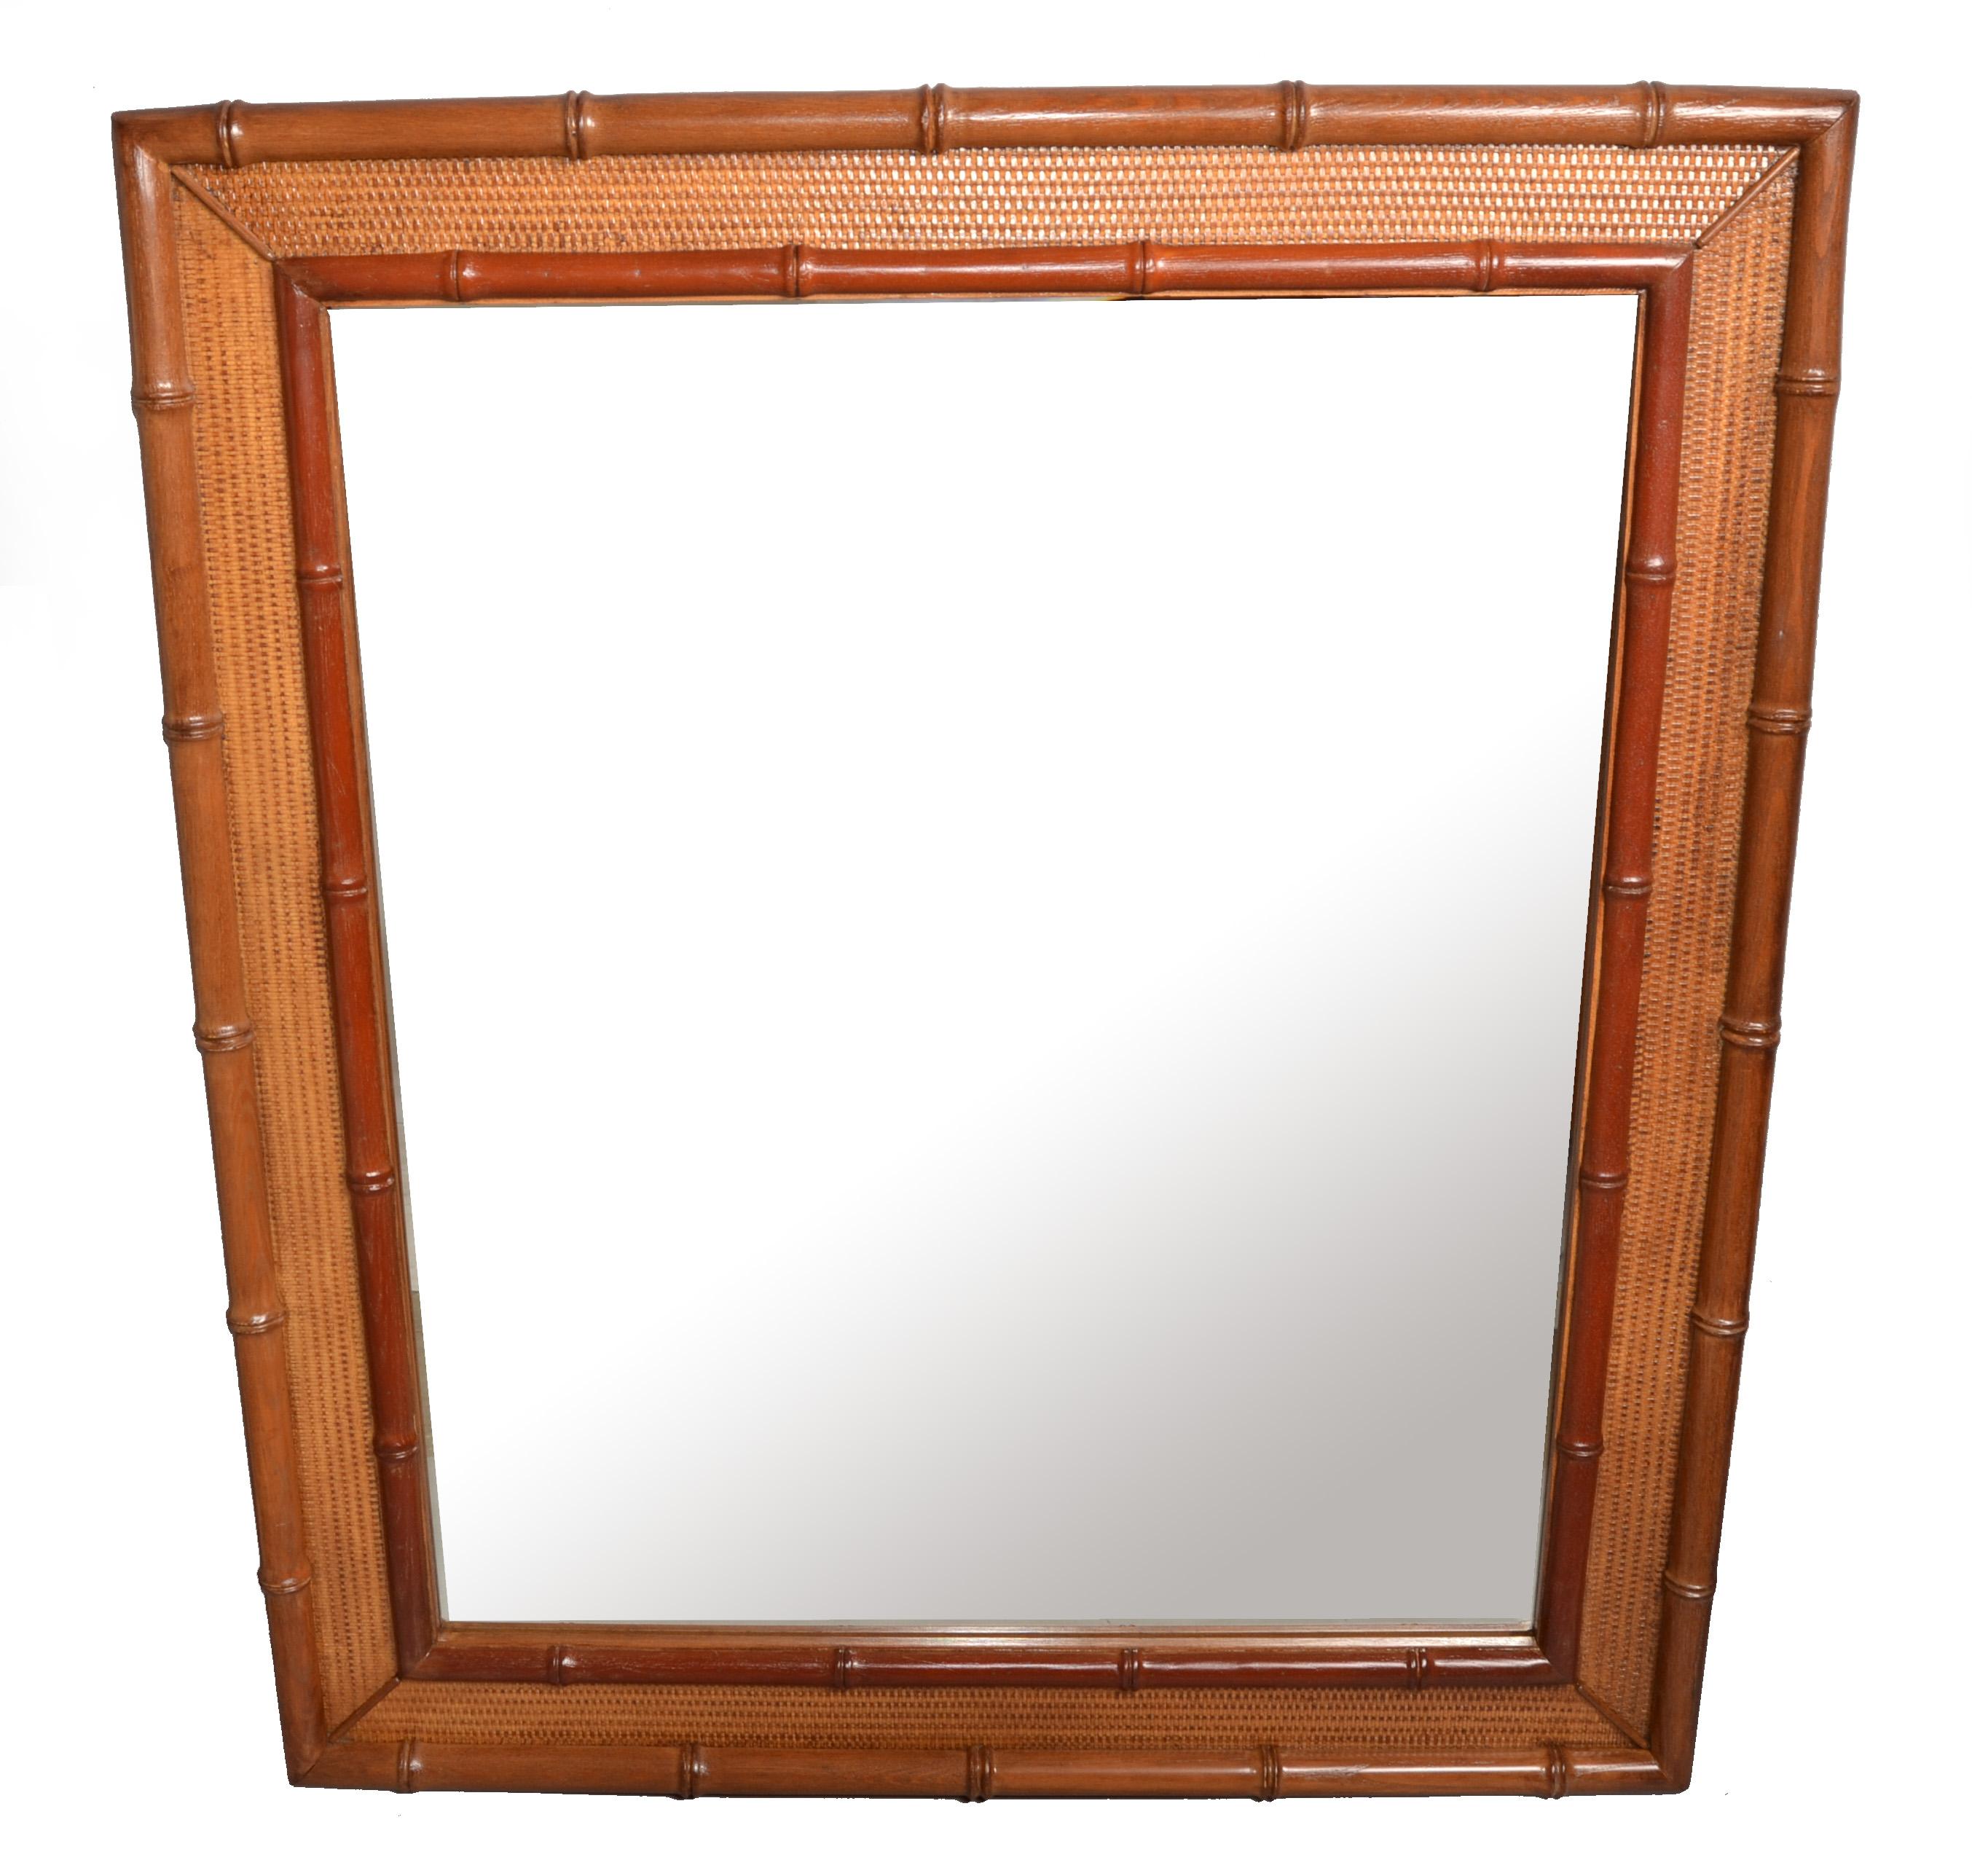 Hollywood Regency Bohemian Rectangular Handwoven Rattan and Bamboo Wall Mirror  In Good Condition For Sale In Miami, FL